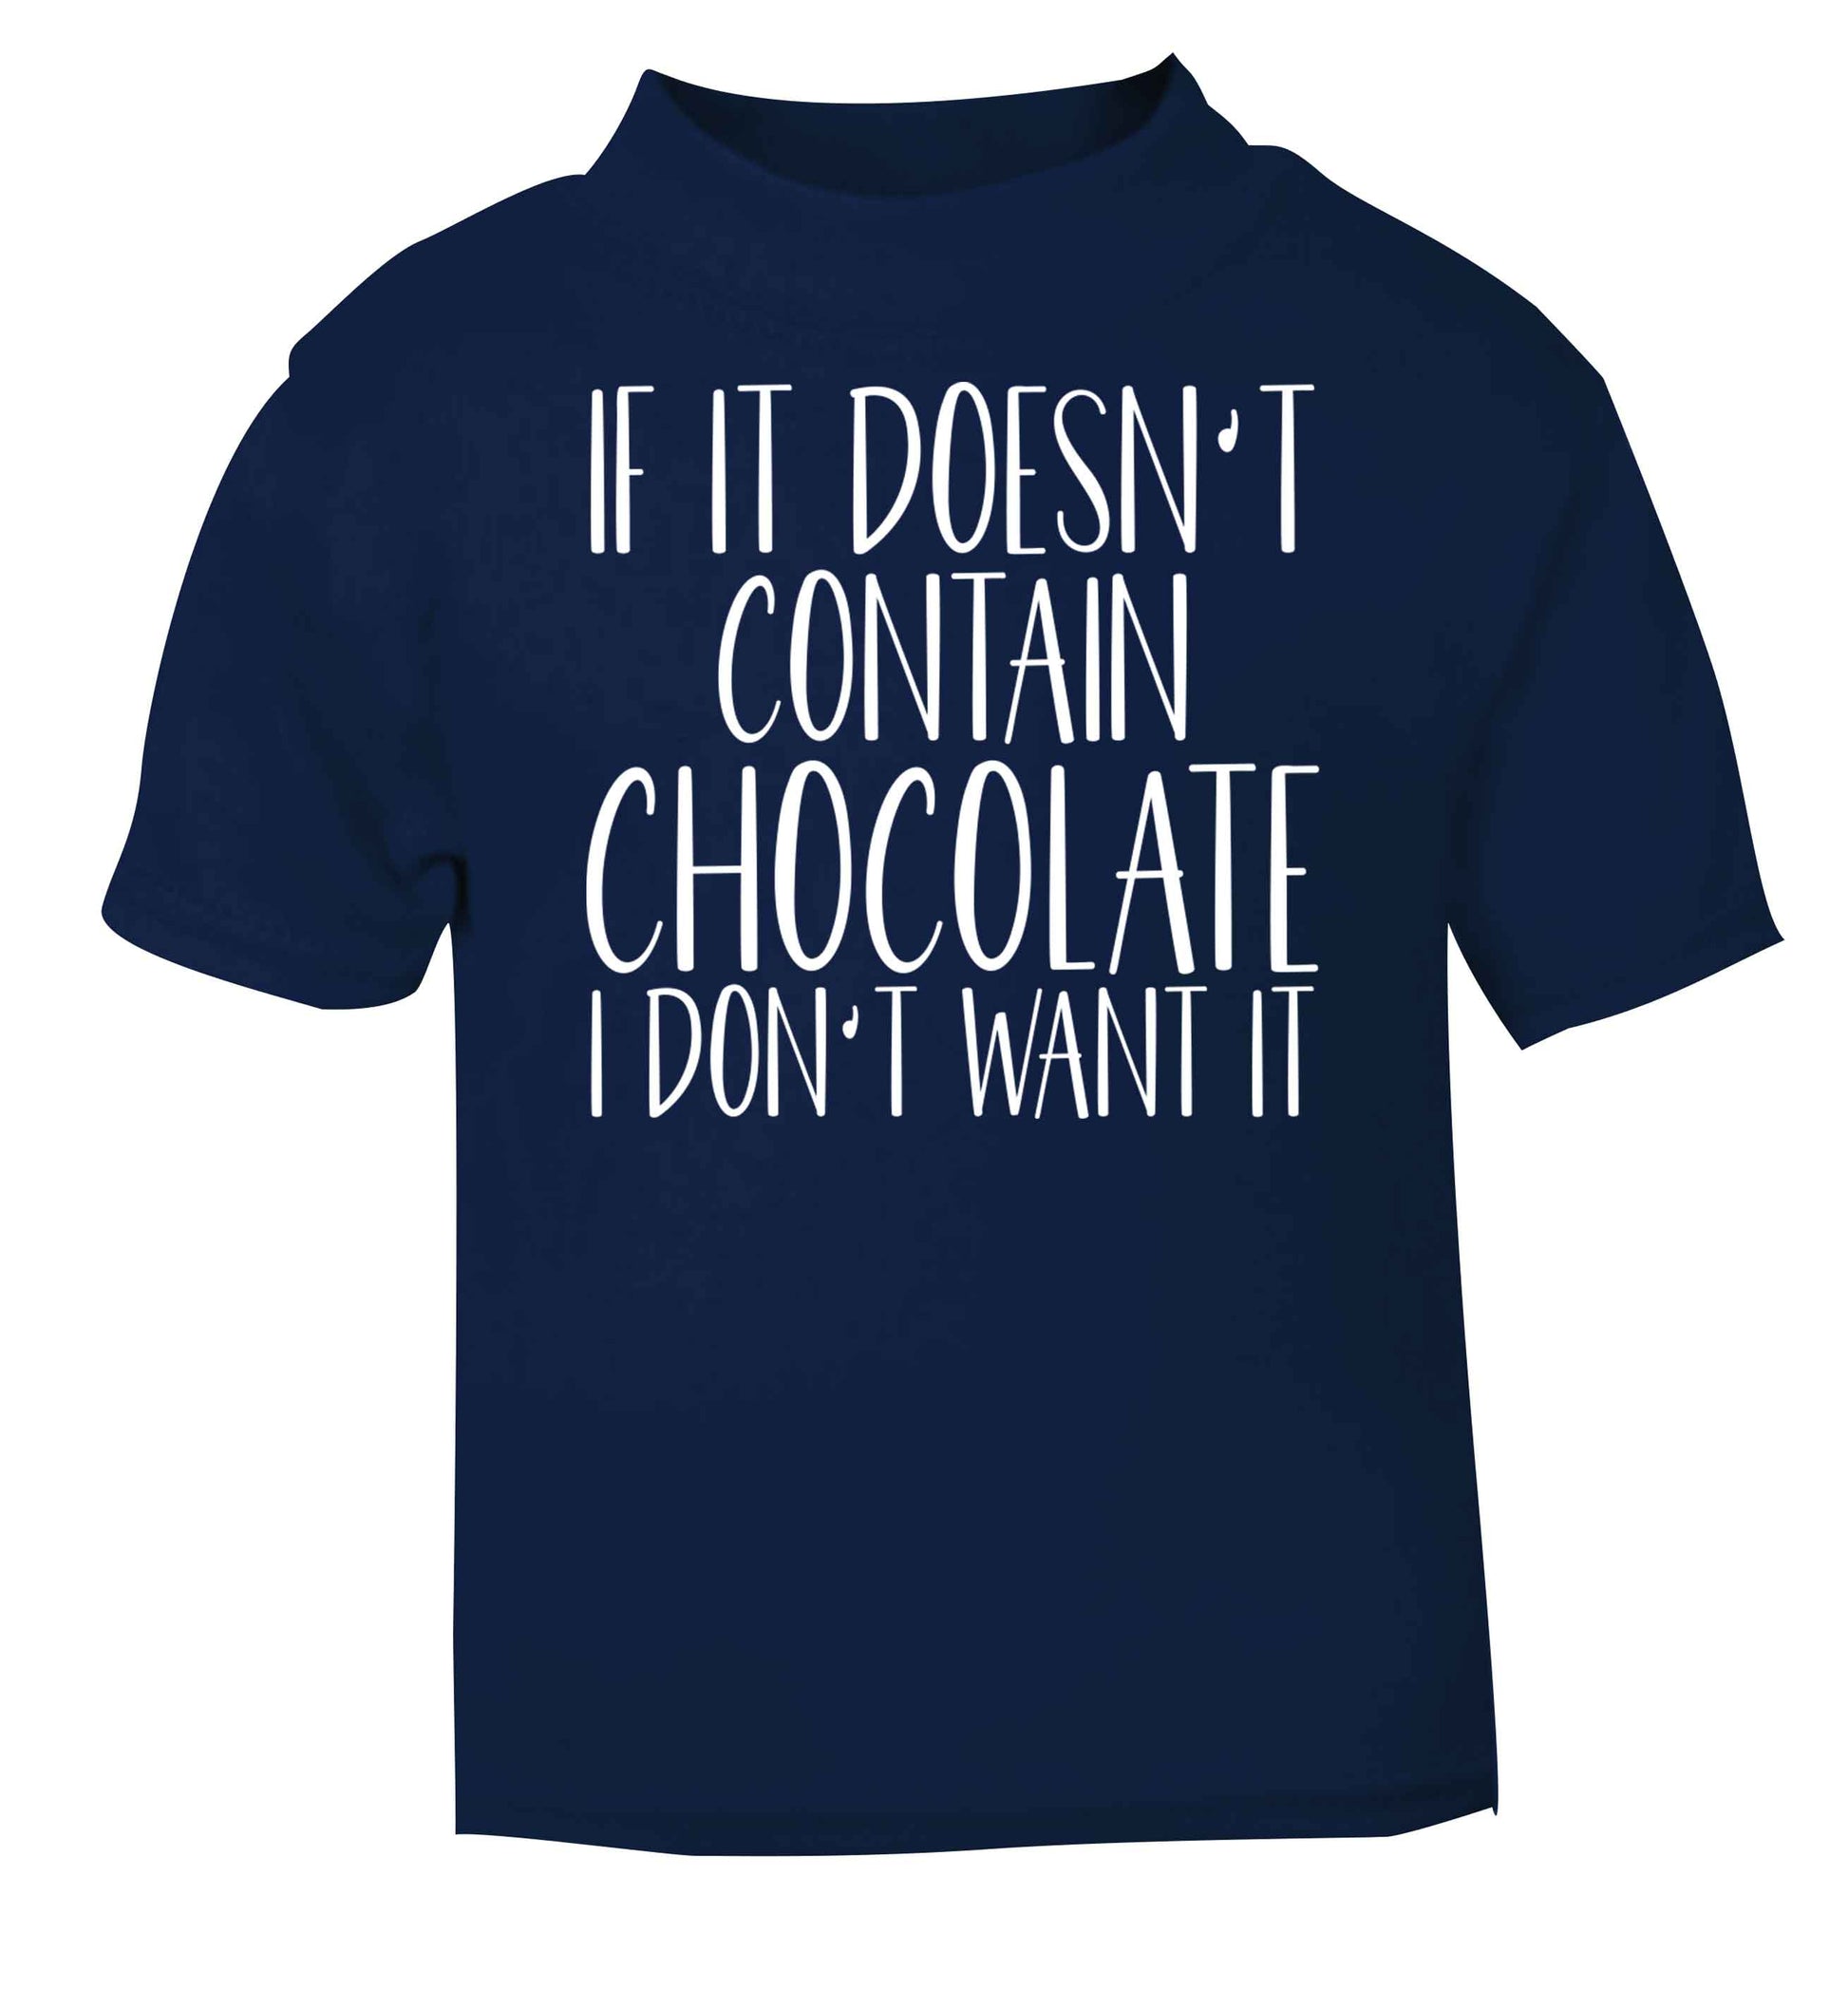 If it doesn't contain chocolate I don't want it navy baby toddler Tshirt 2 Years